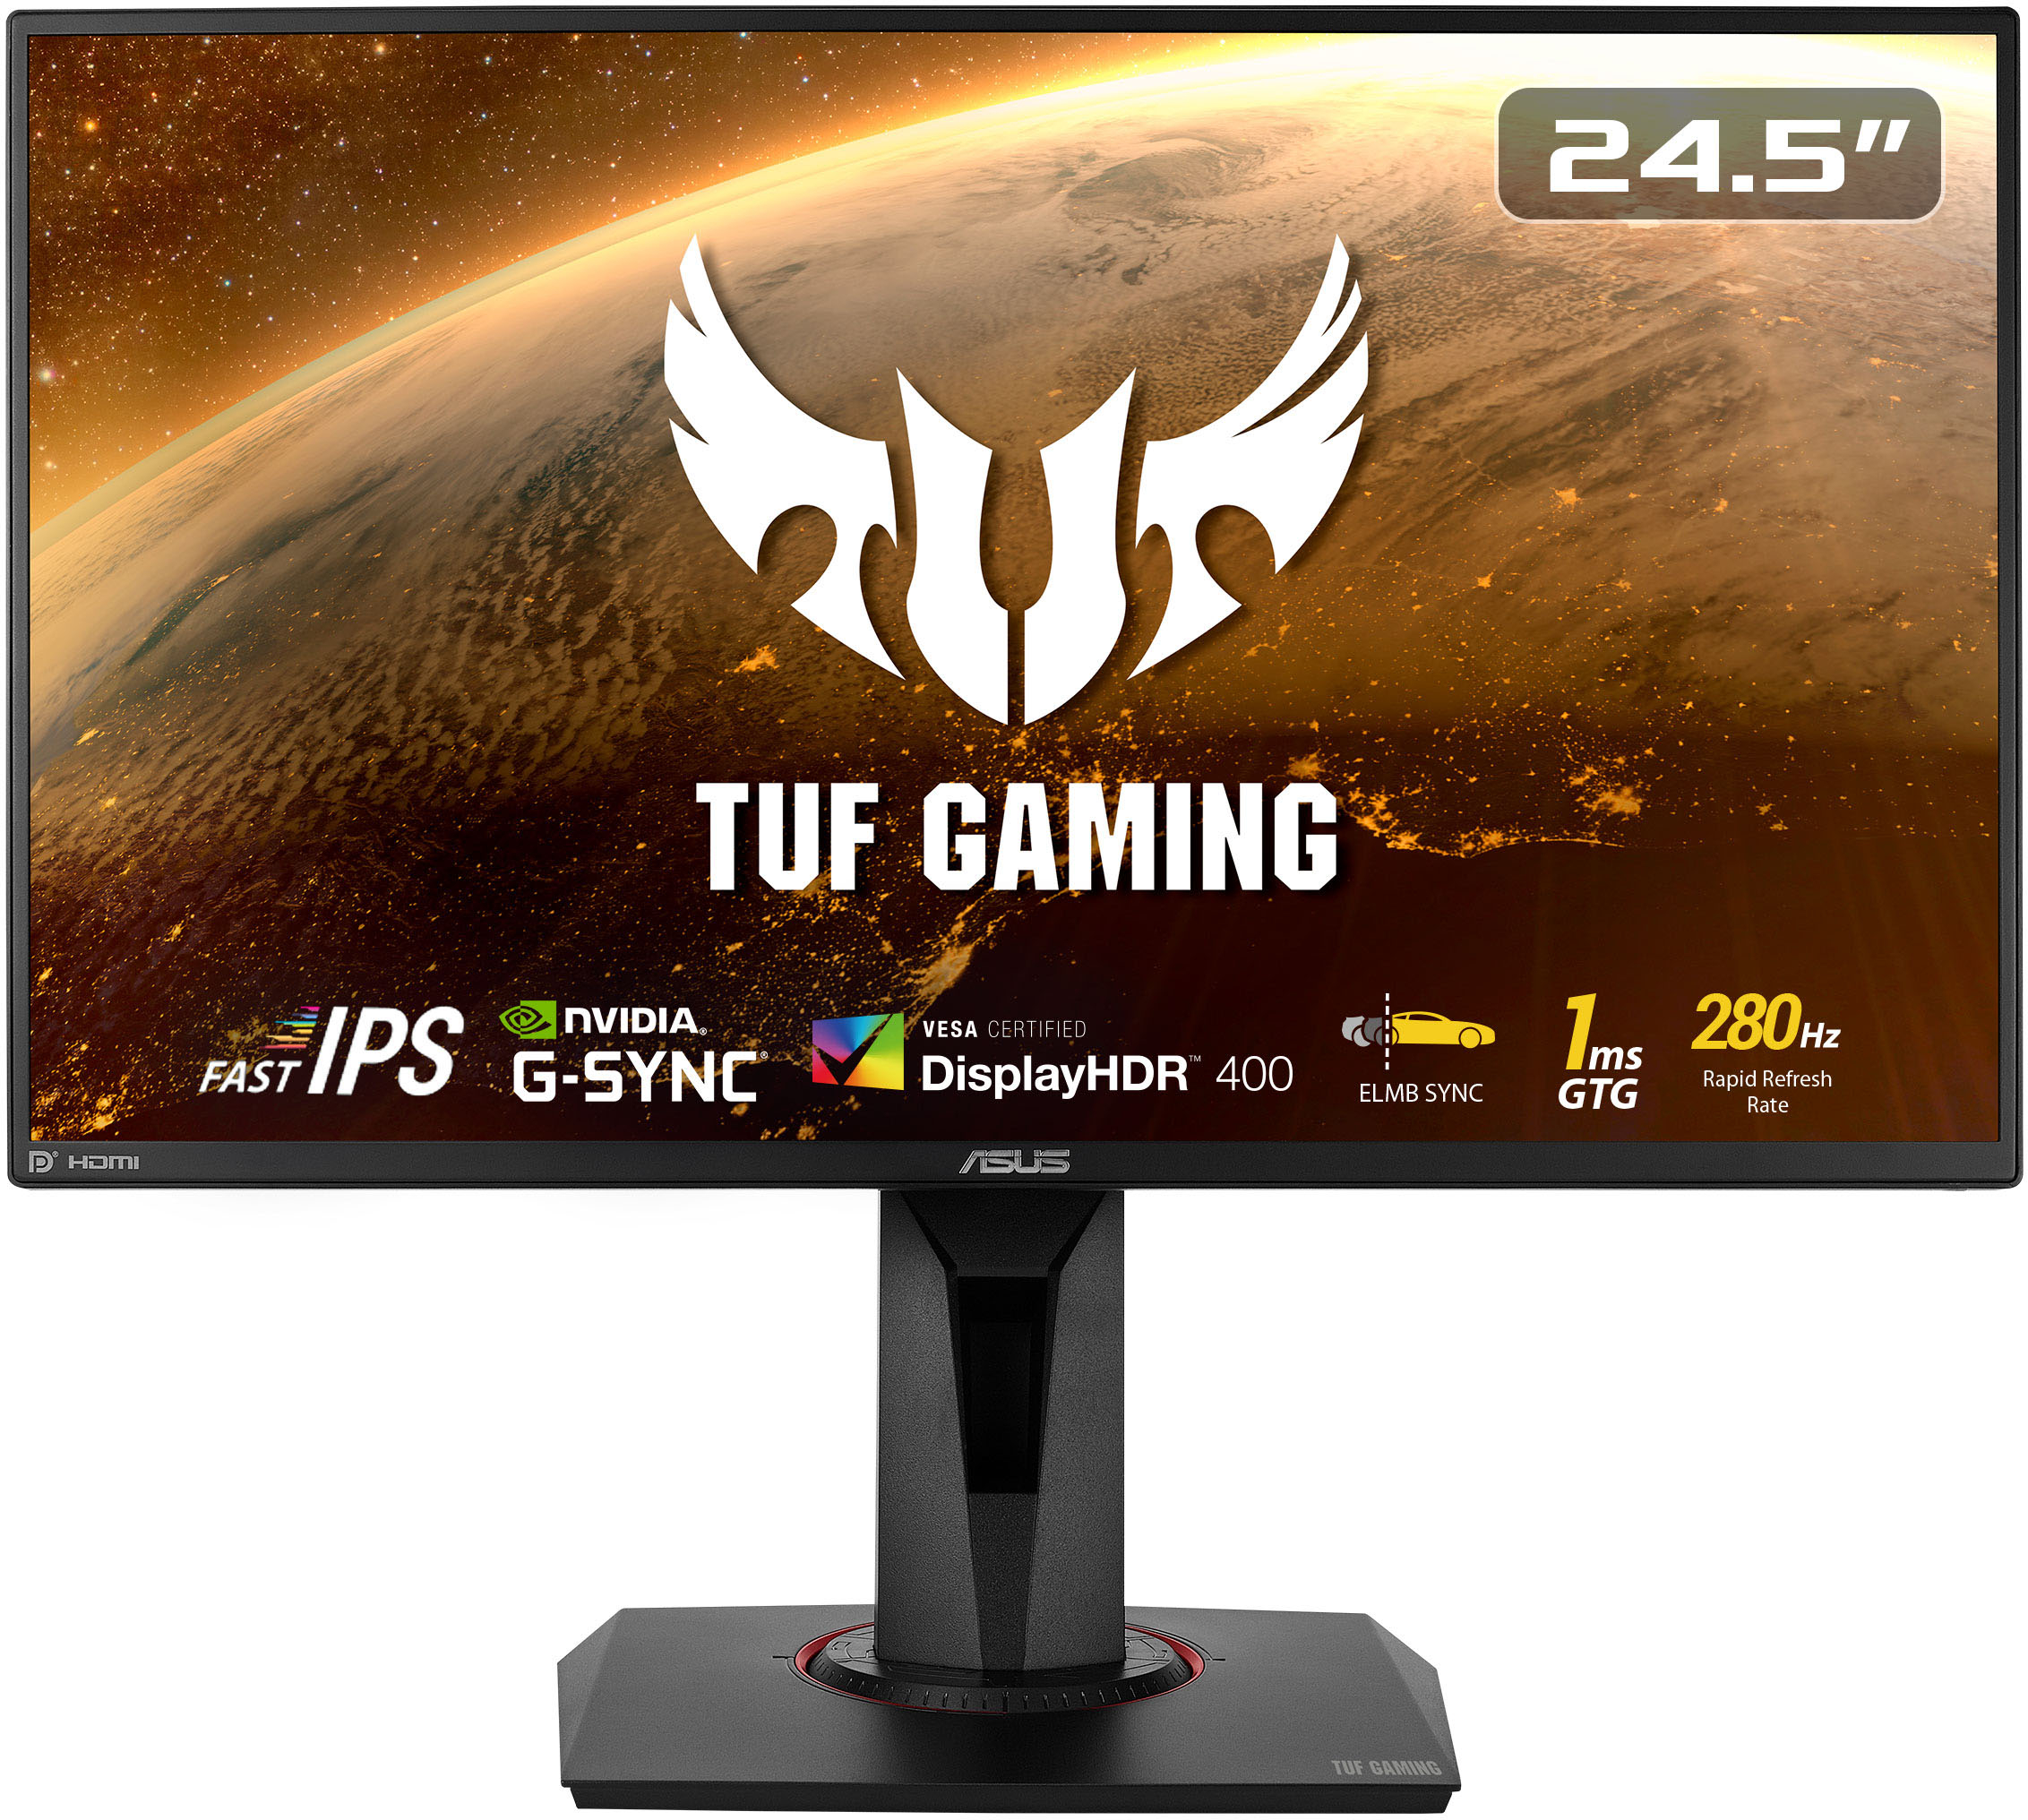 Asus Tuf Gaming Vg259qmy 280hz 24 5 Fast Ips Lcd Fhd 1ms G Sync Compatible Gaming Monitor With Displayhdr 400 Vg259qmy Best Buy